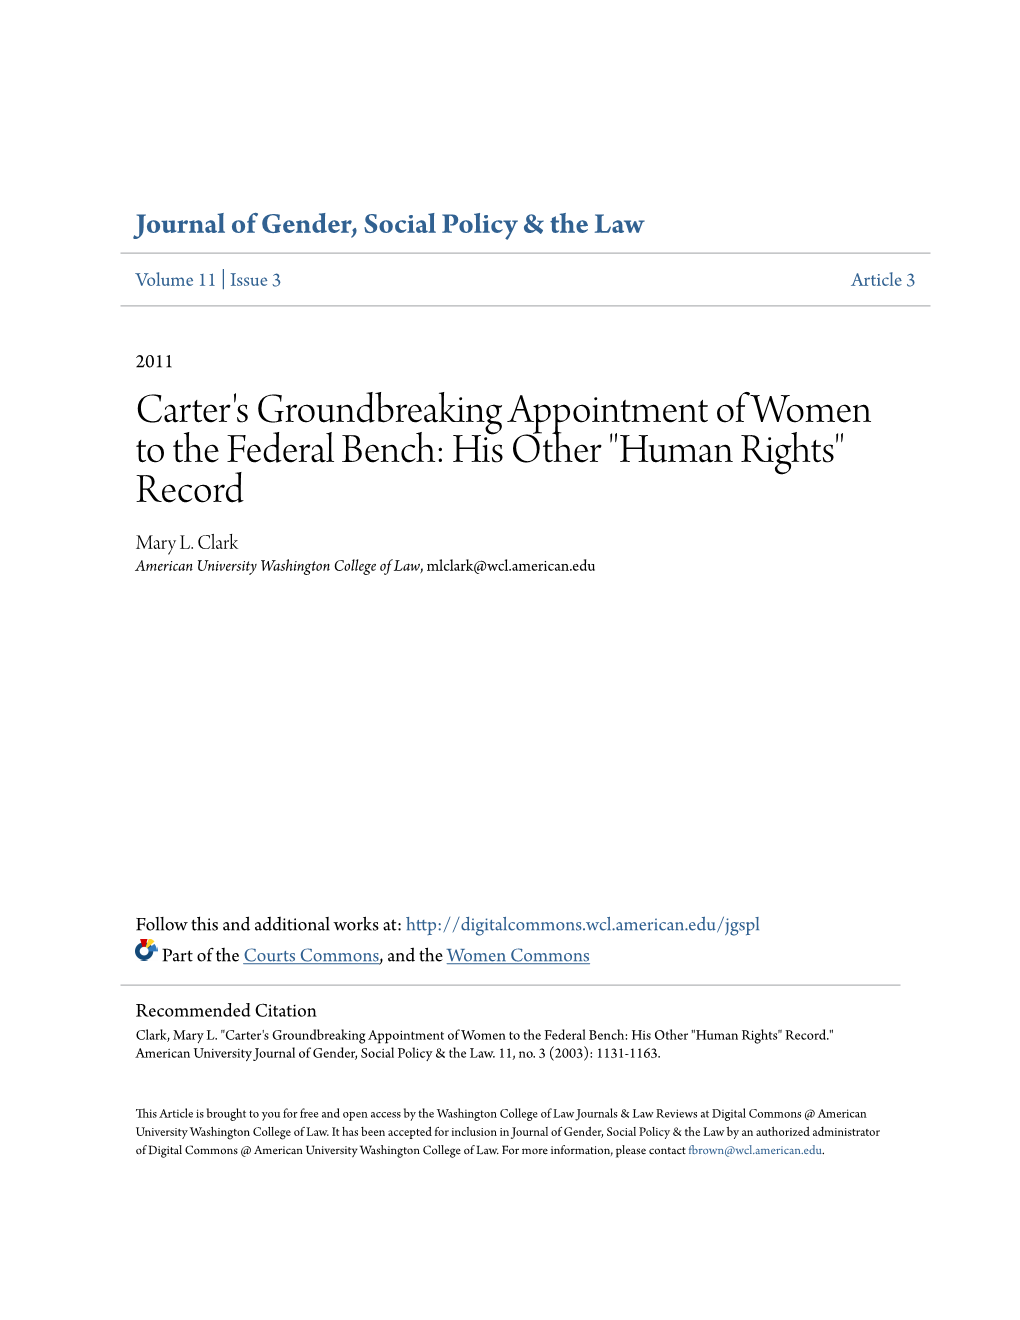 Carter's Groundbreaking Appointment of Women to the Federal Bench: His Other "Human Rights" Record Mary L